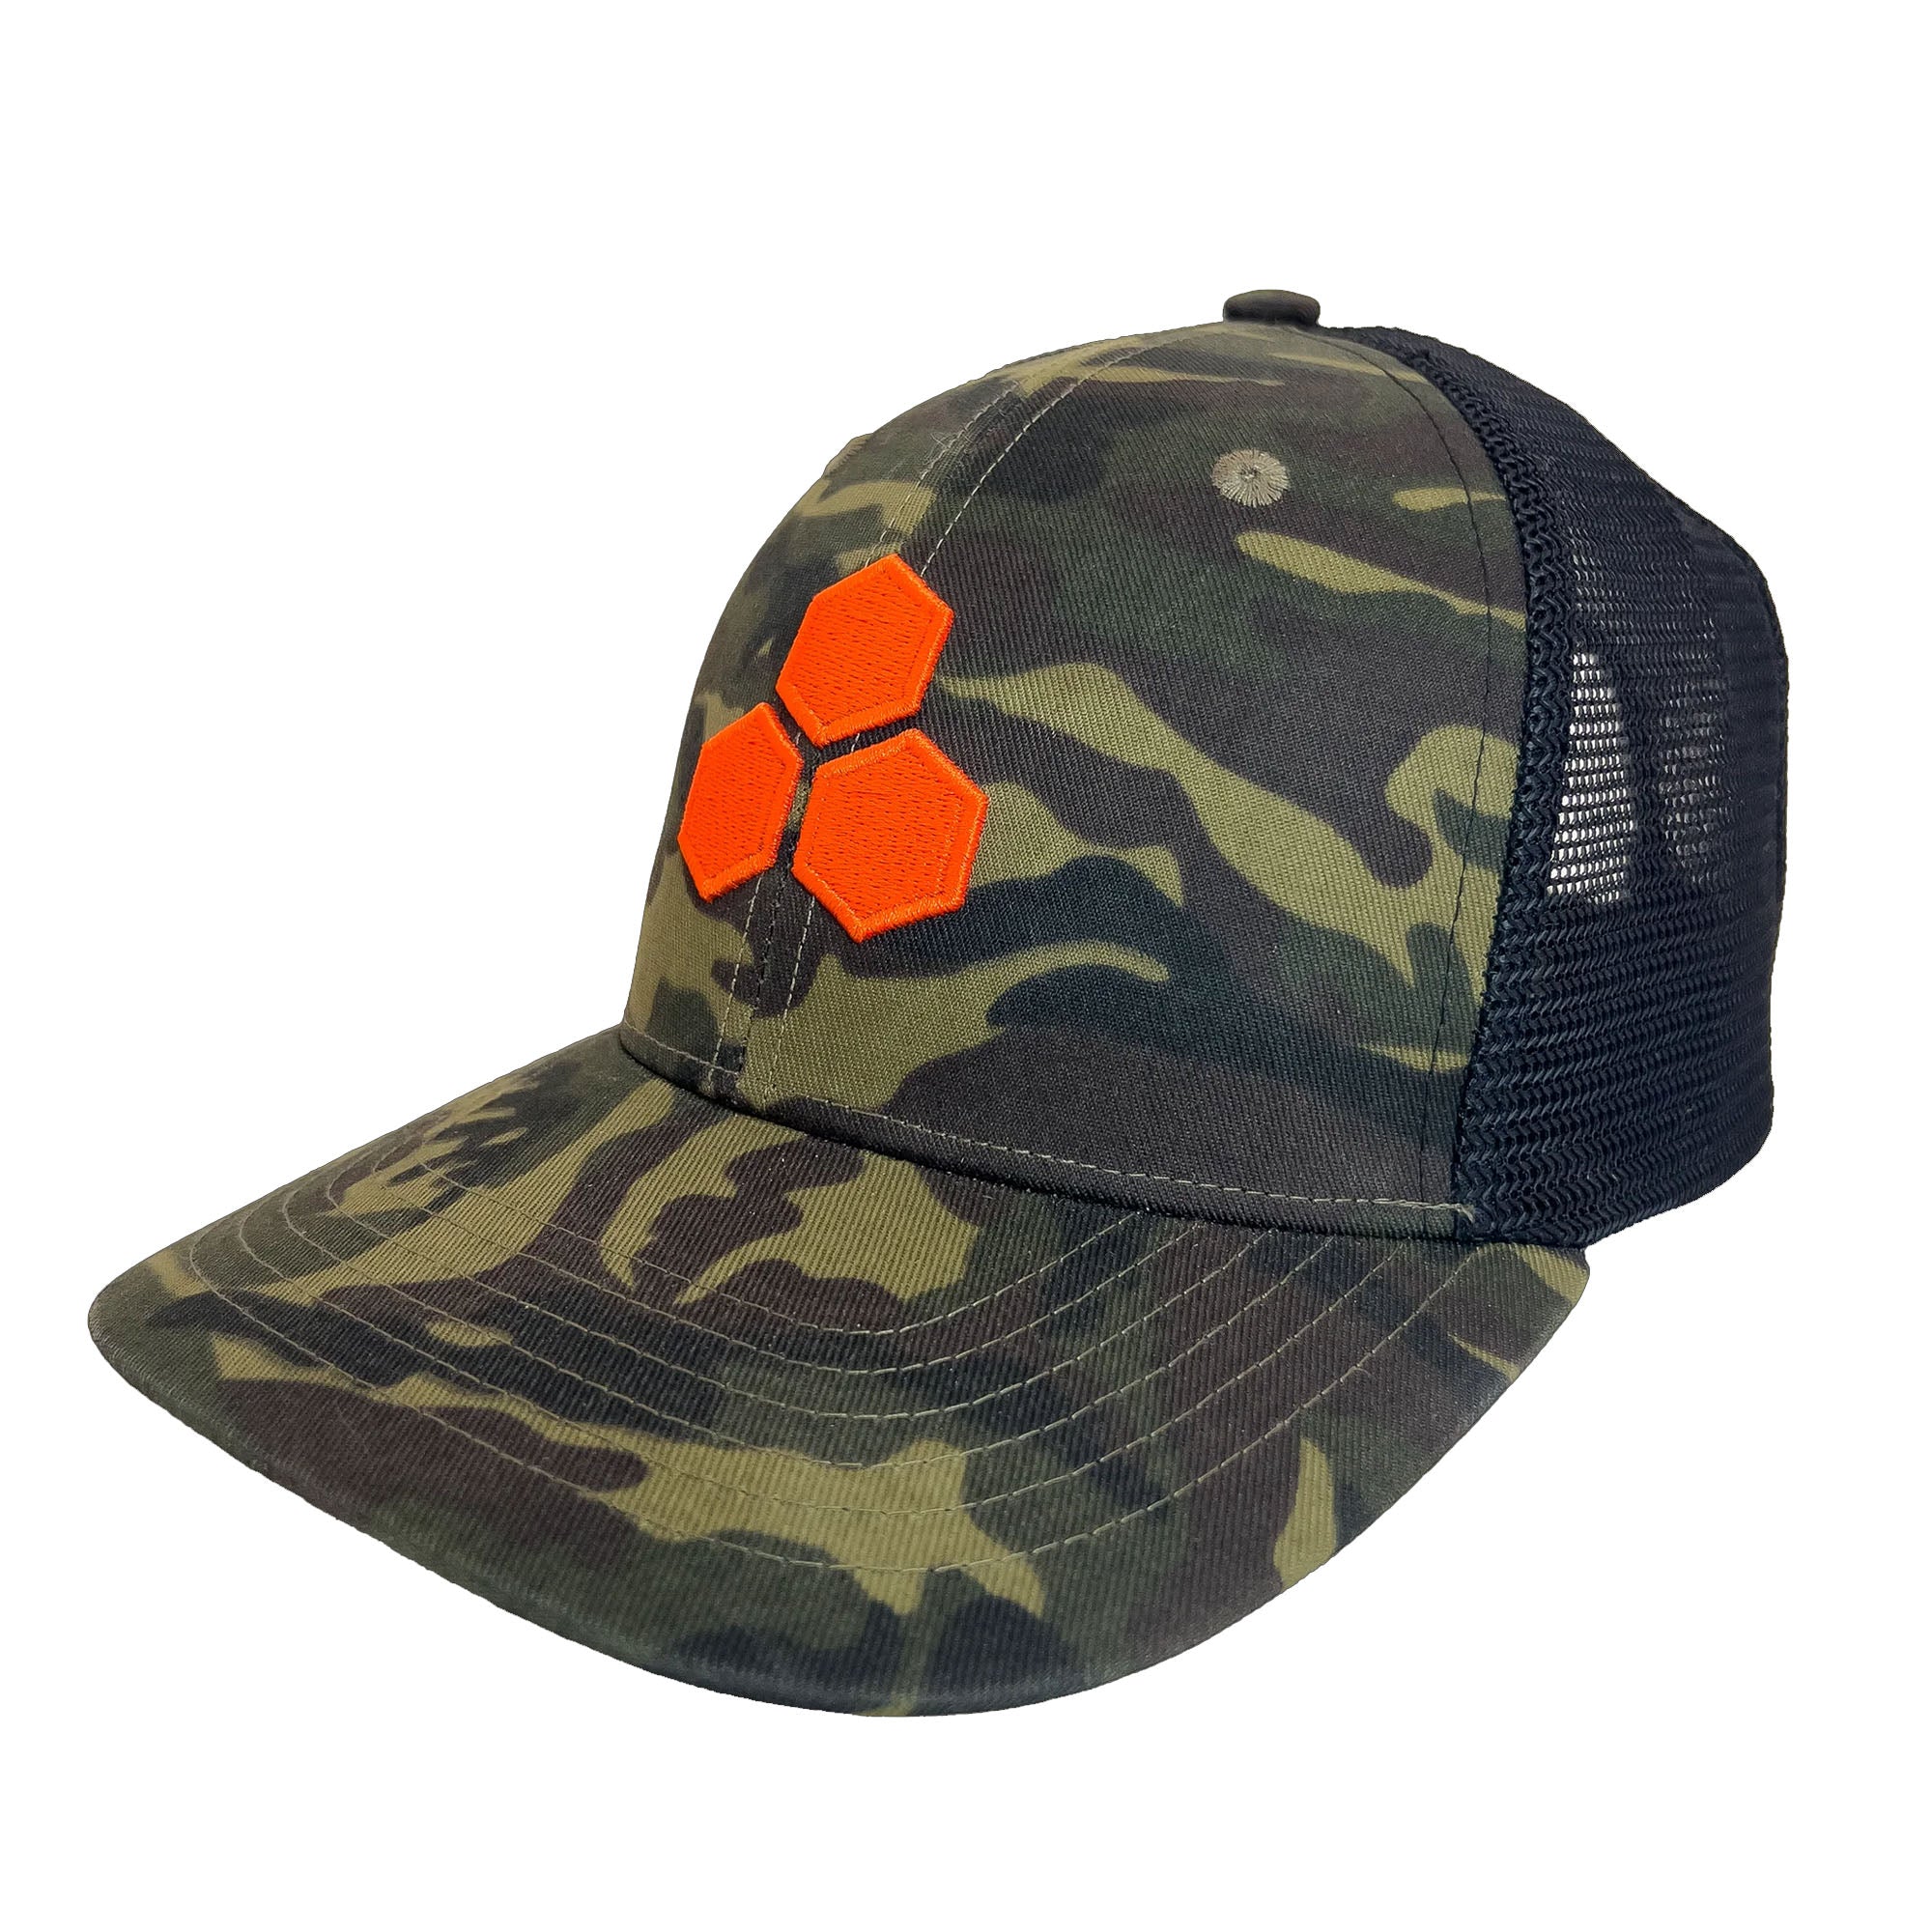 Channel Islands Country Camo Men's Hat